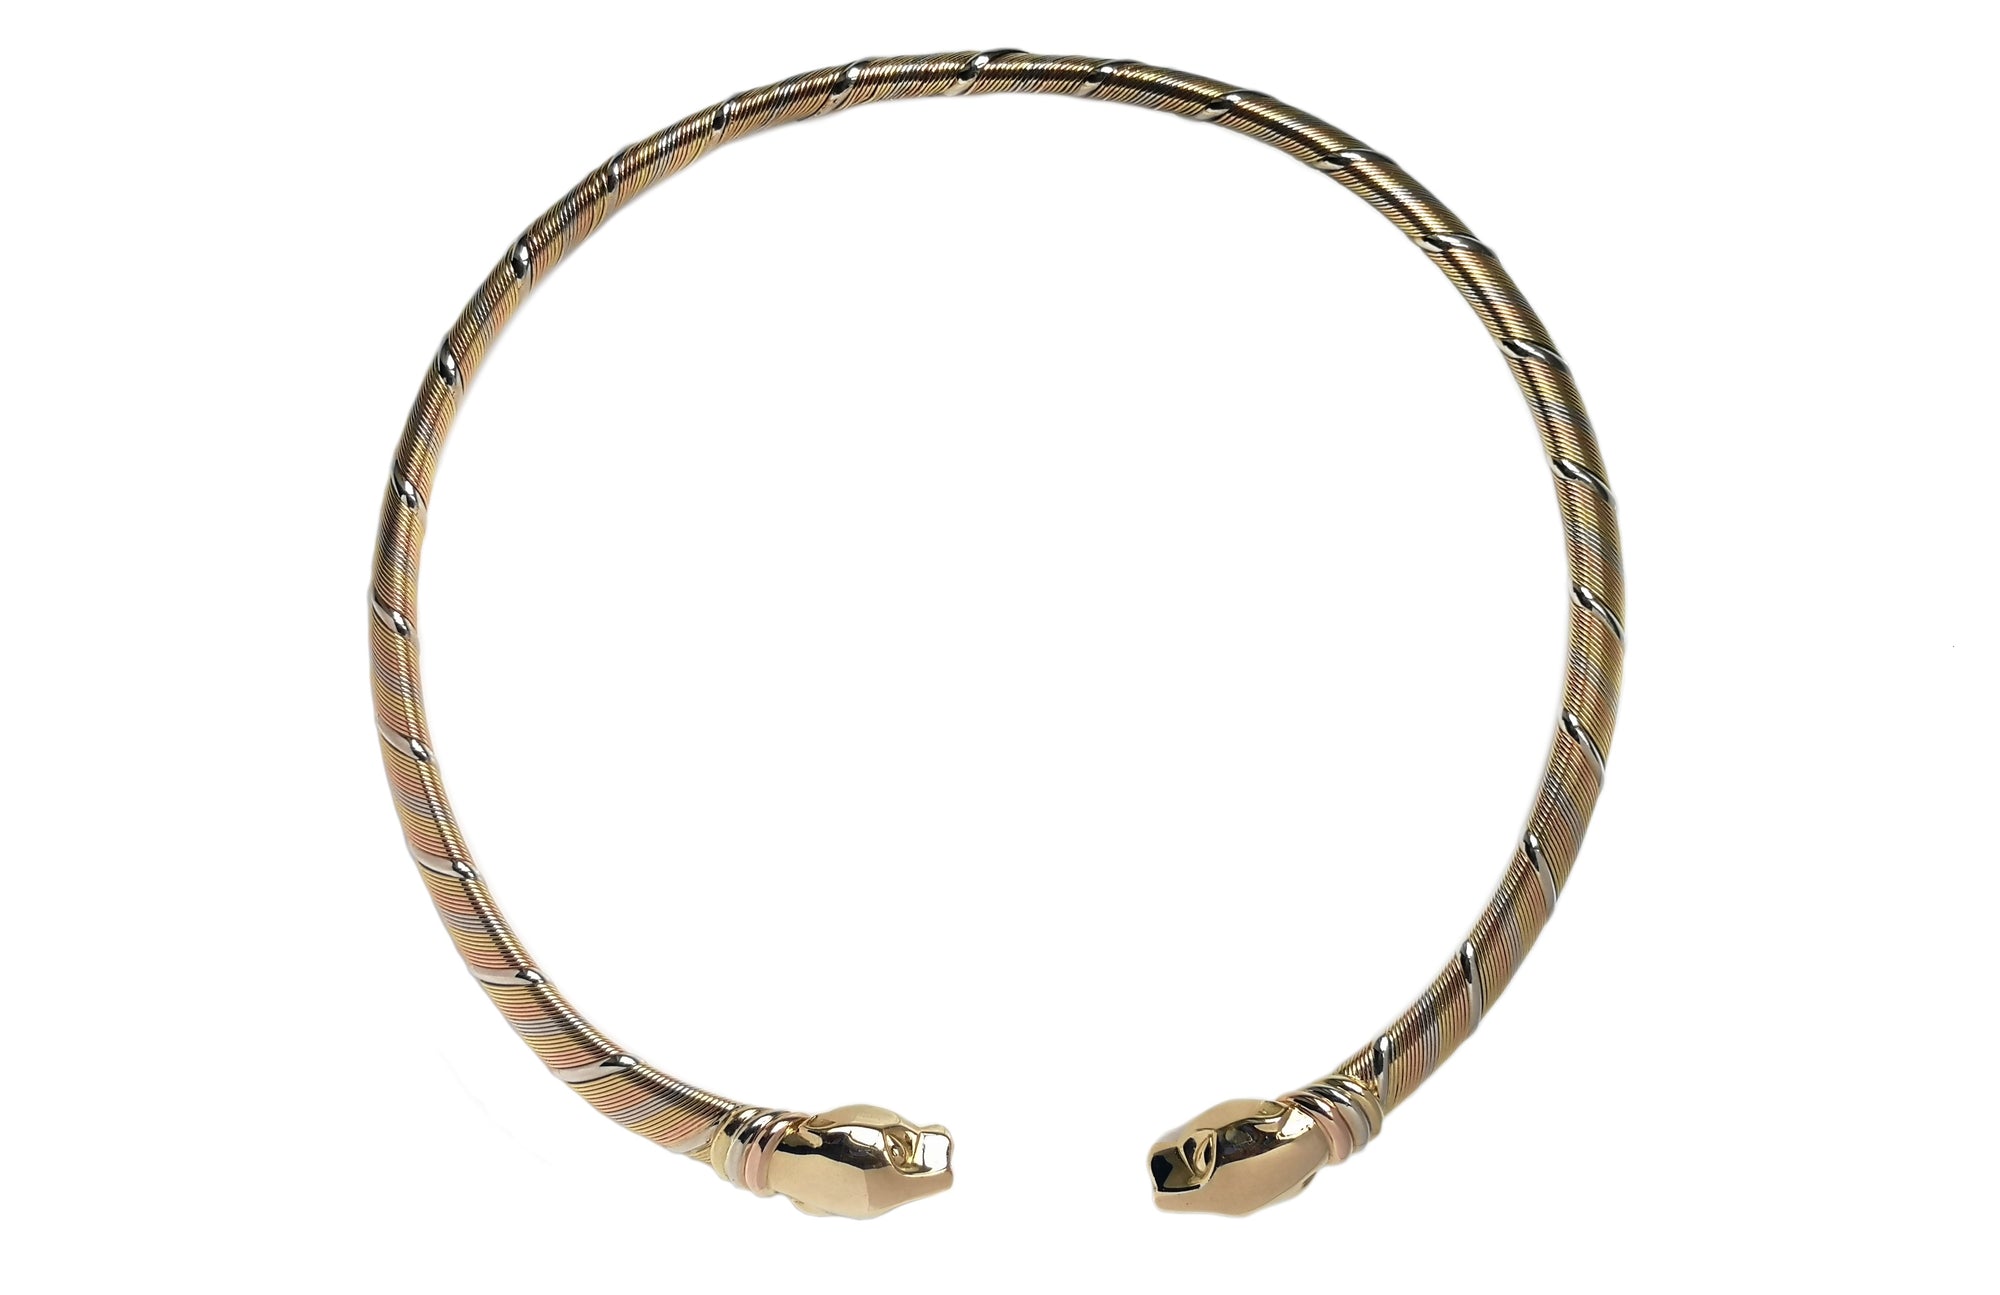 Cartier Panthere Cougar Tri-colour Choker Necklace in 18k Gold